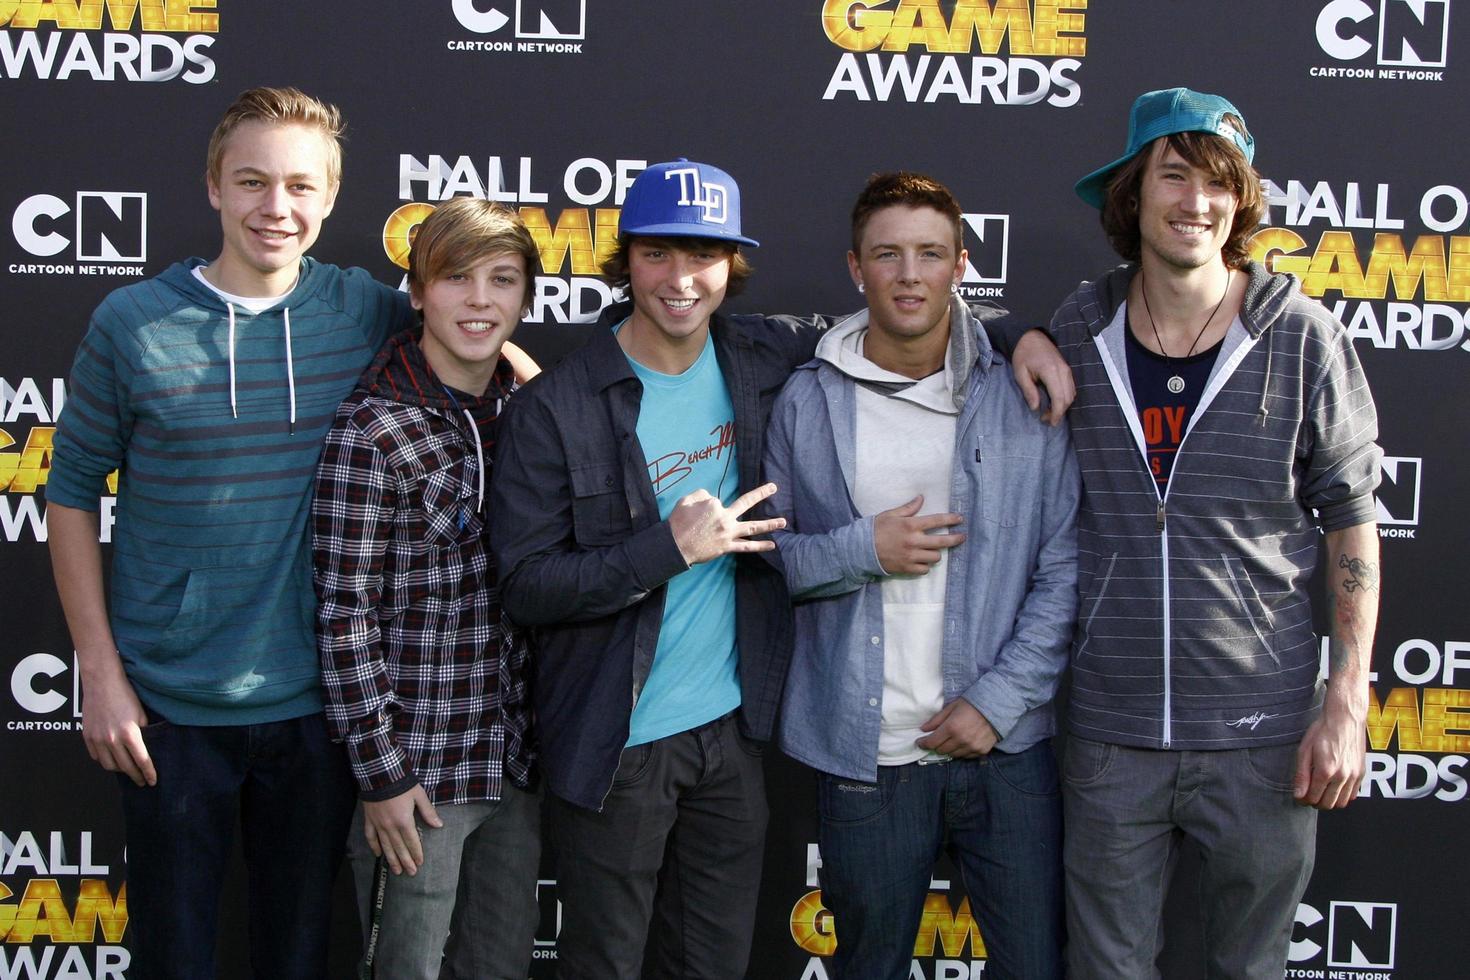 LOS ANGELES - FEB 18 - Emblem 3 at the 2012 Cartoon Network Hall of Game Awards at the Barker Hanger on February 18, 2012 in Santa Monica, CA photo